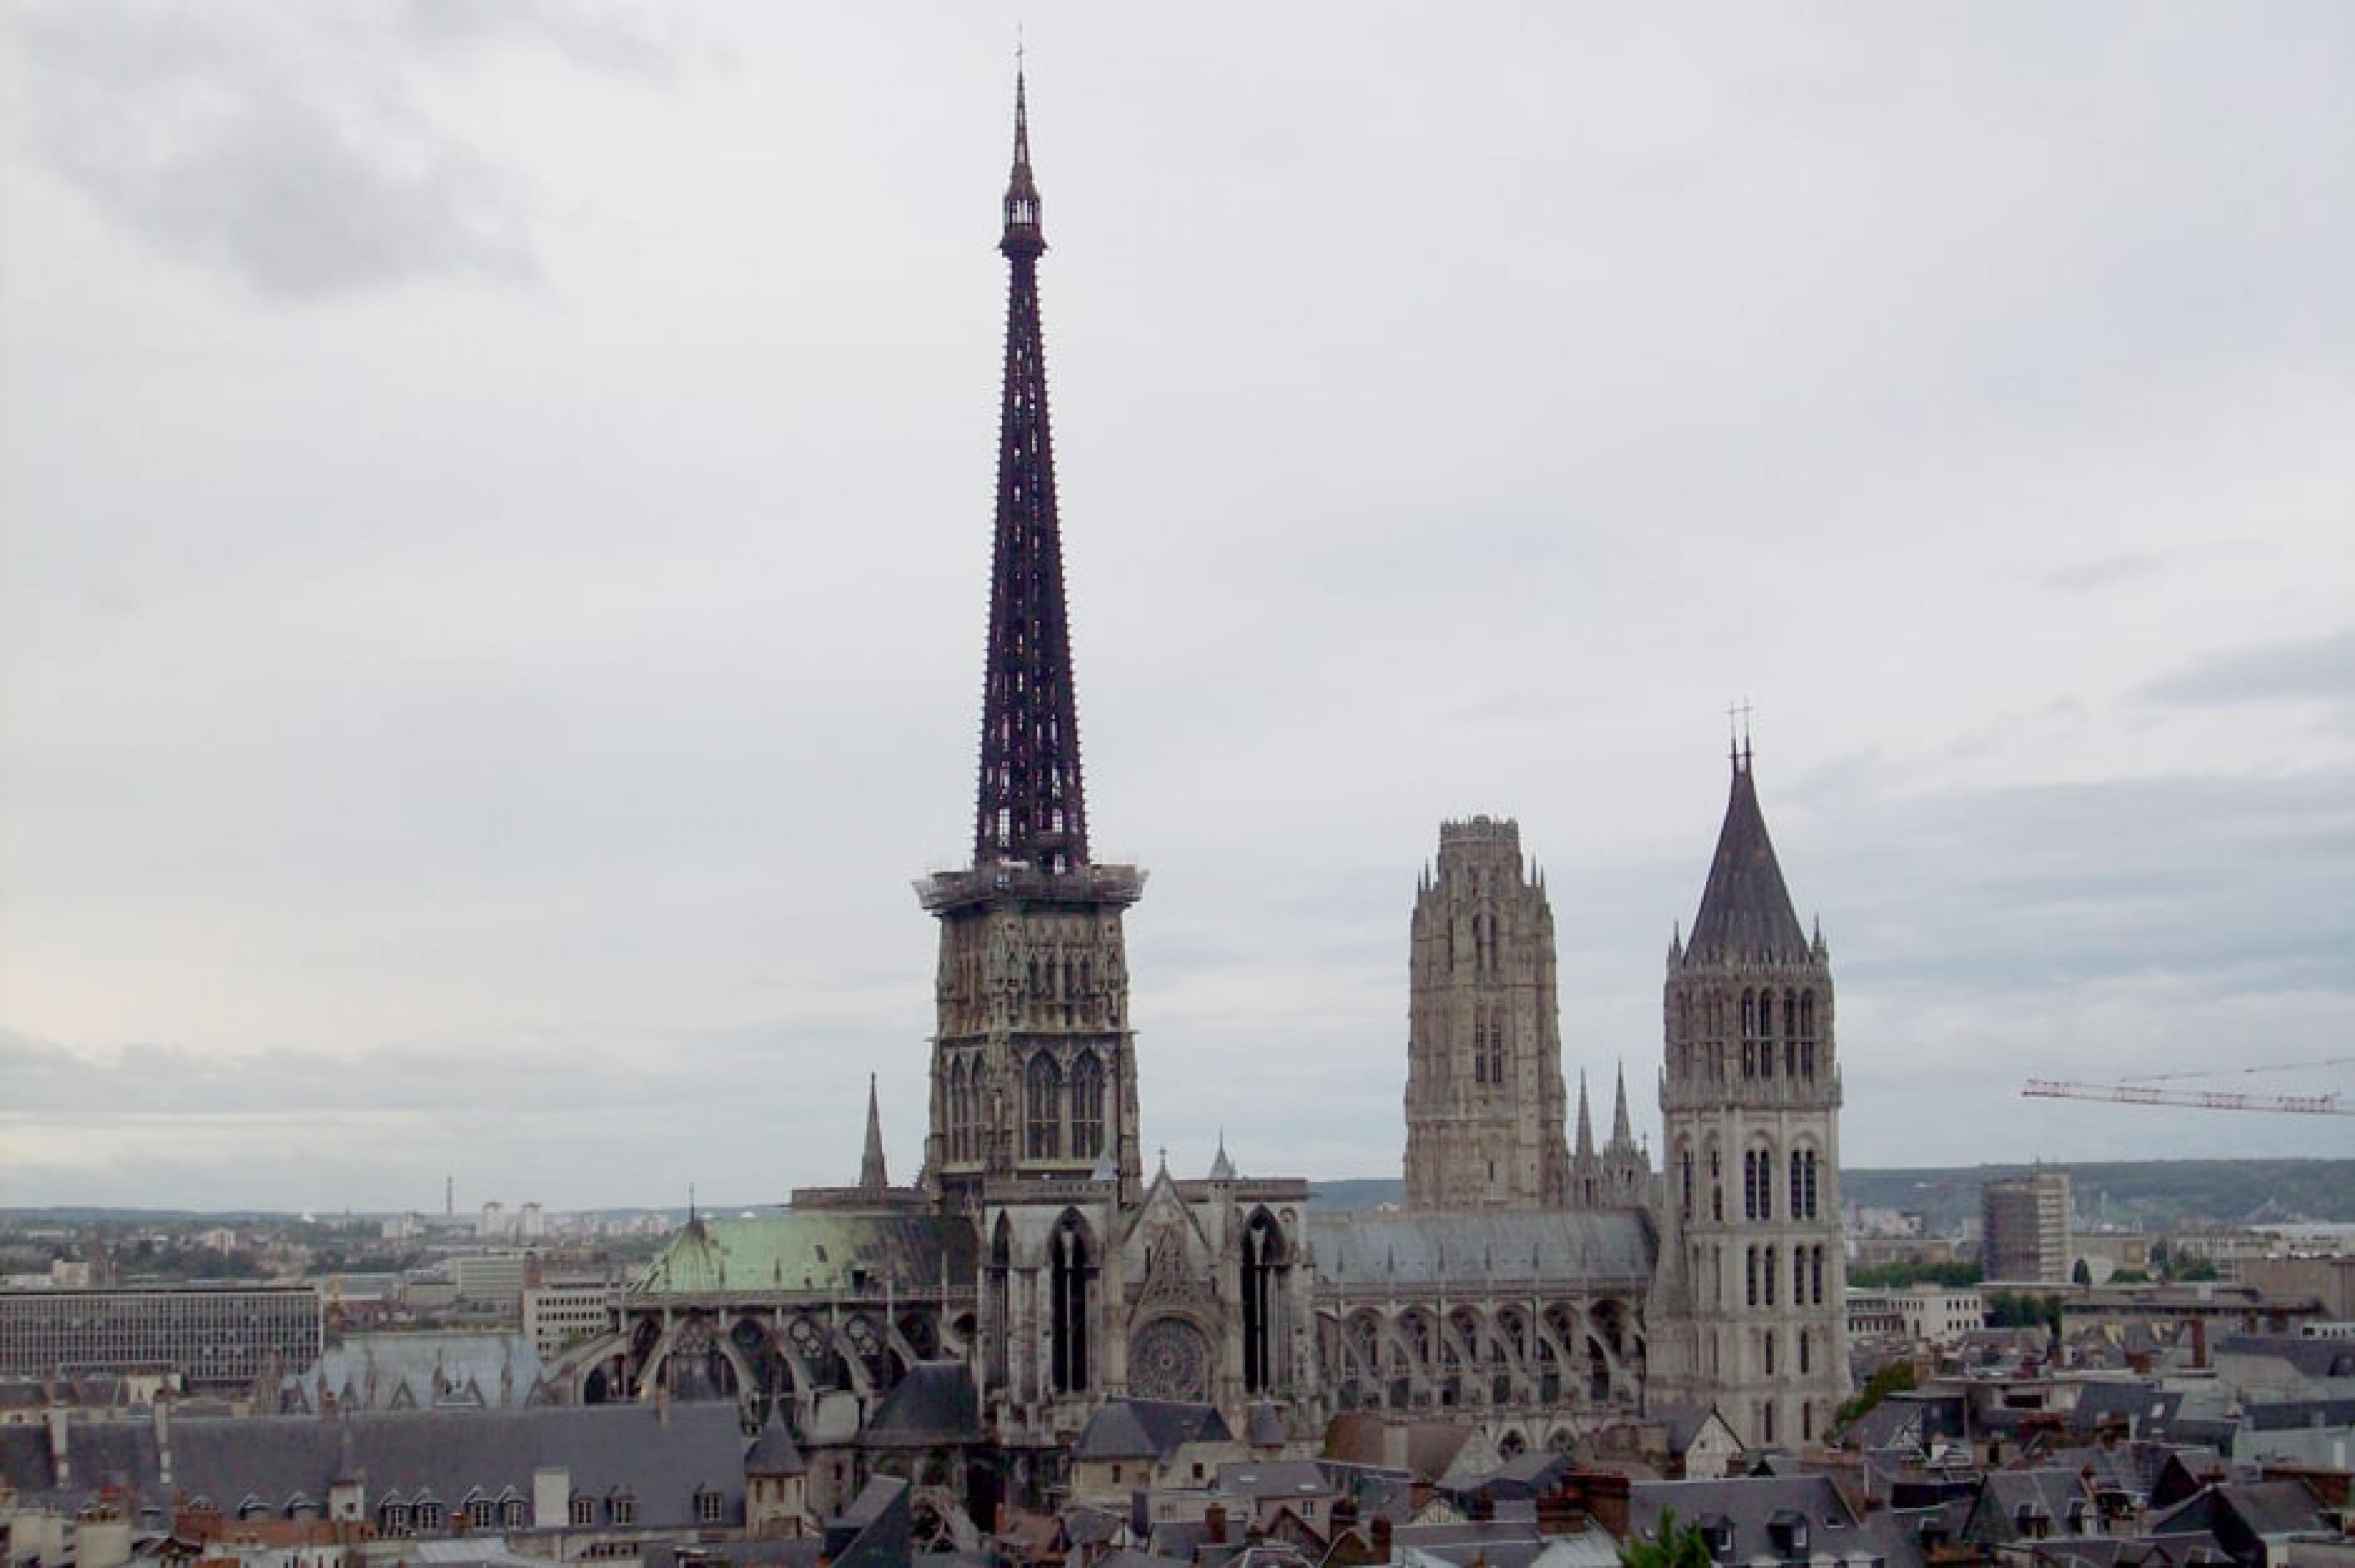 Aerial View - Notre-Dame Cathedral,Normandy, France - Courtesy of Giogio